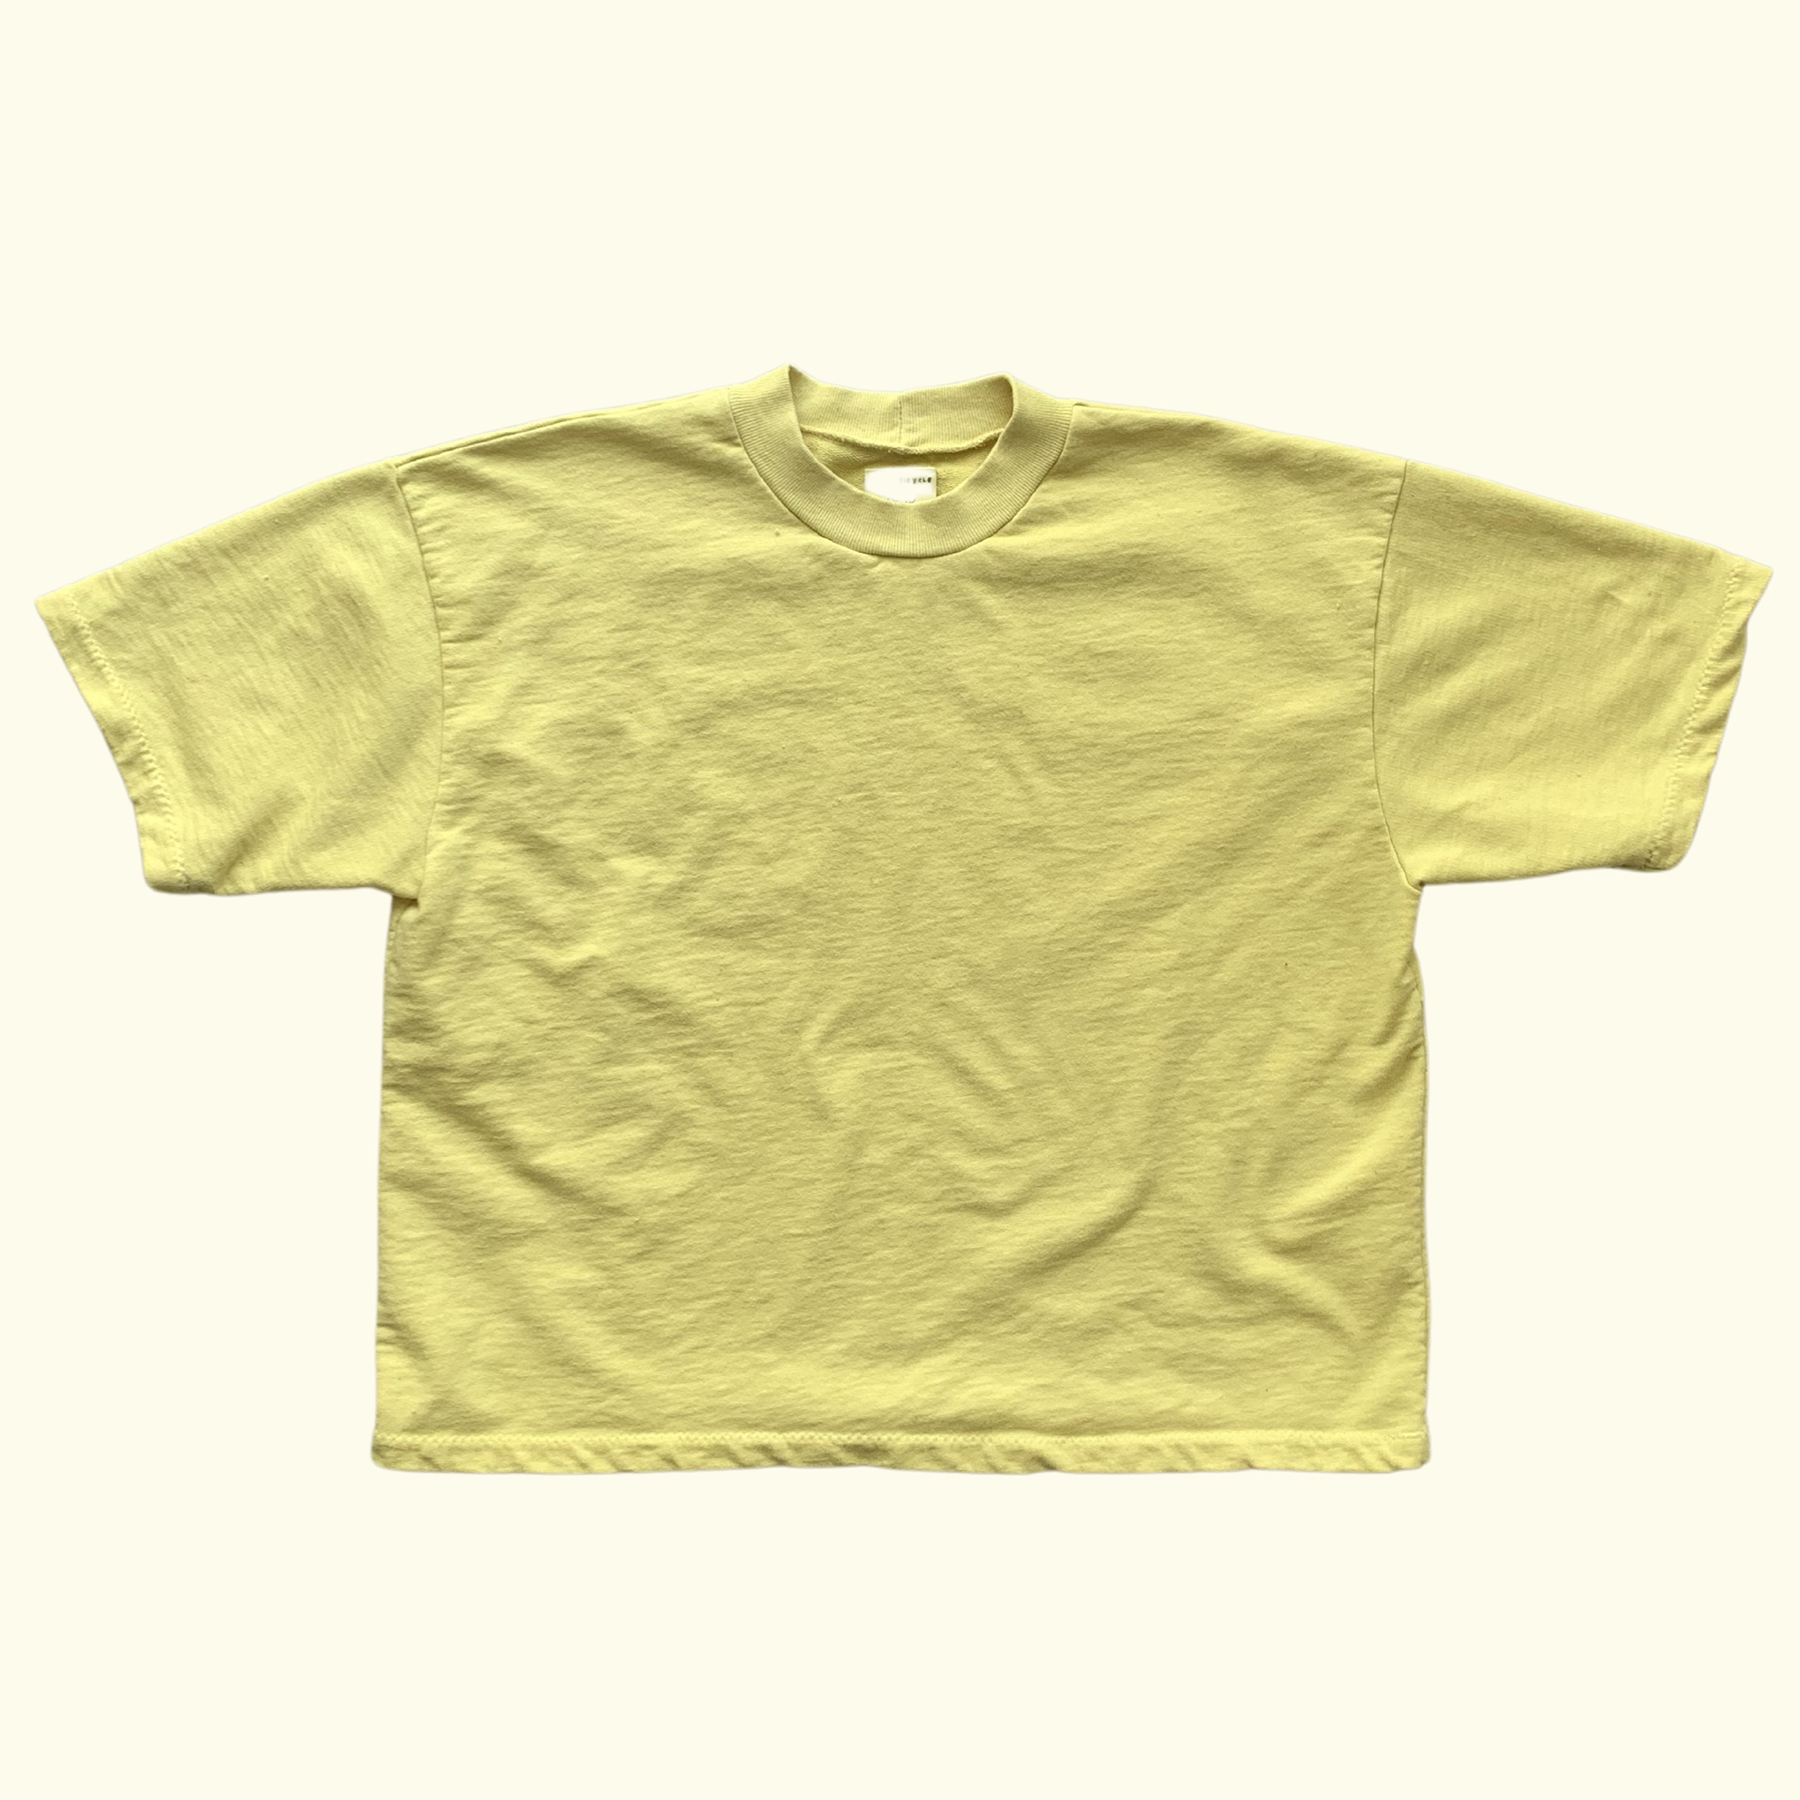 french terry heavy tee - organic usa cotton - garment dyed - L SHORT